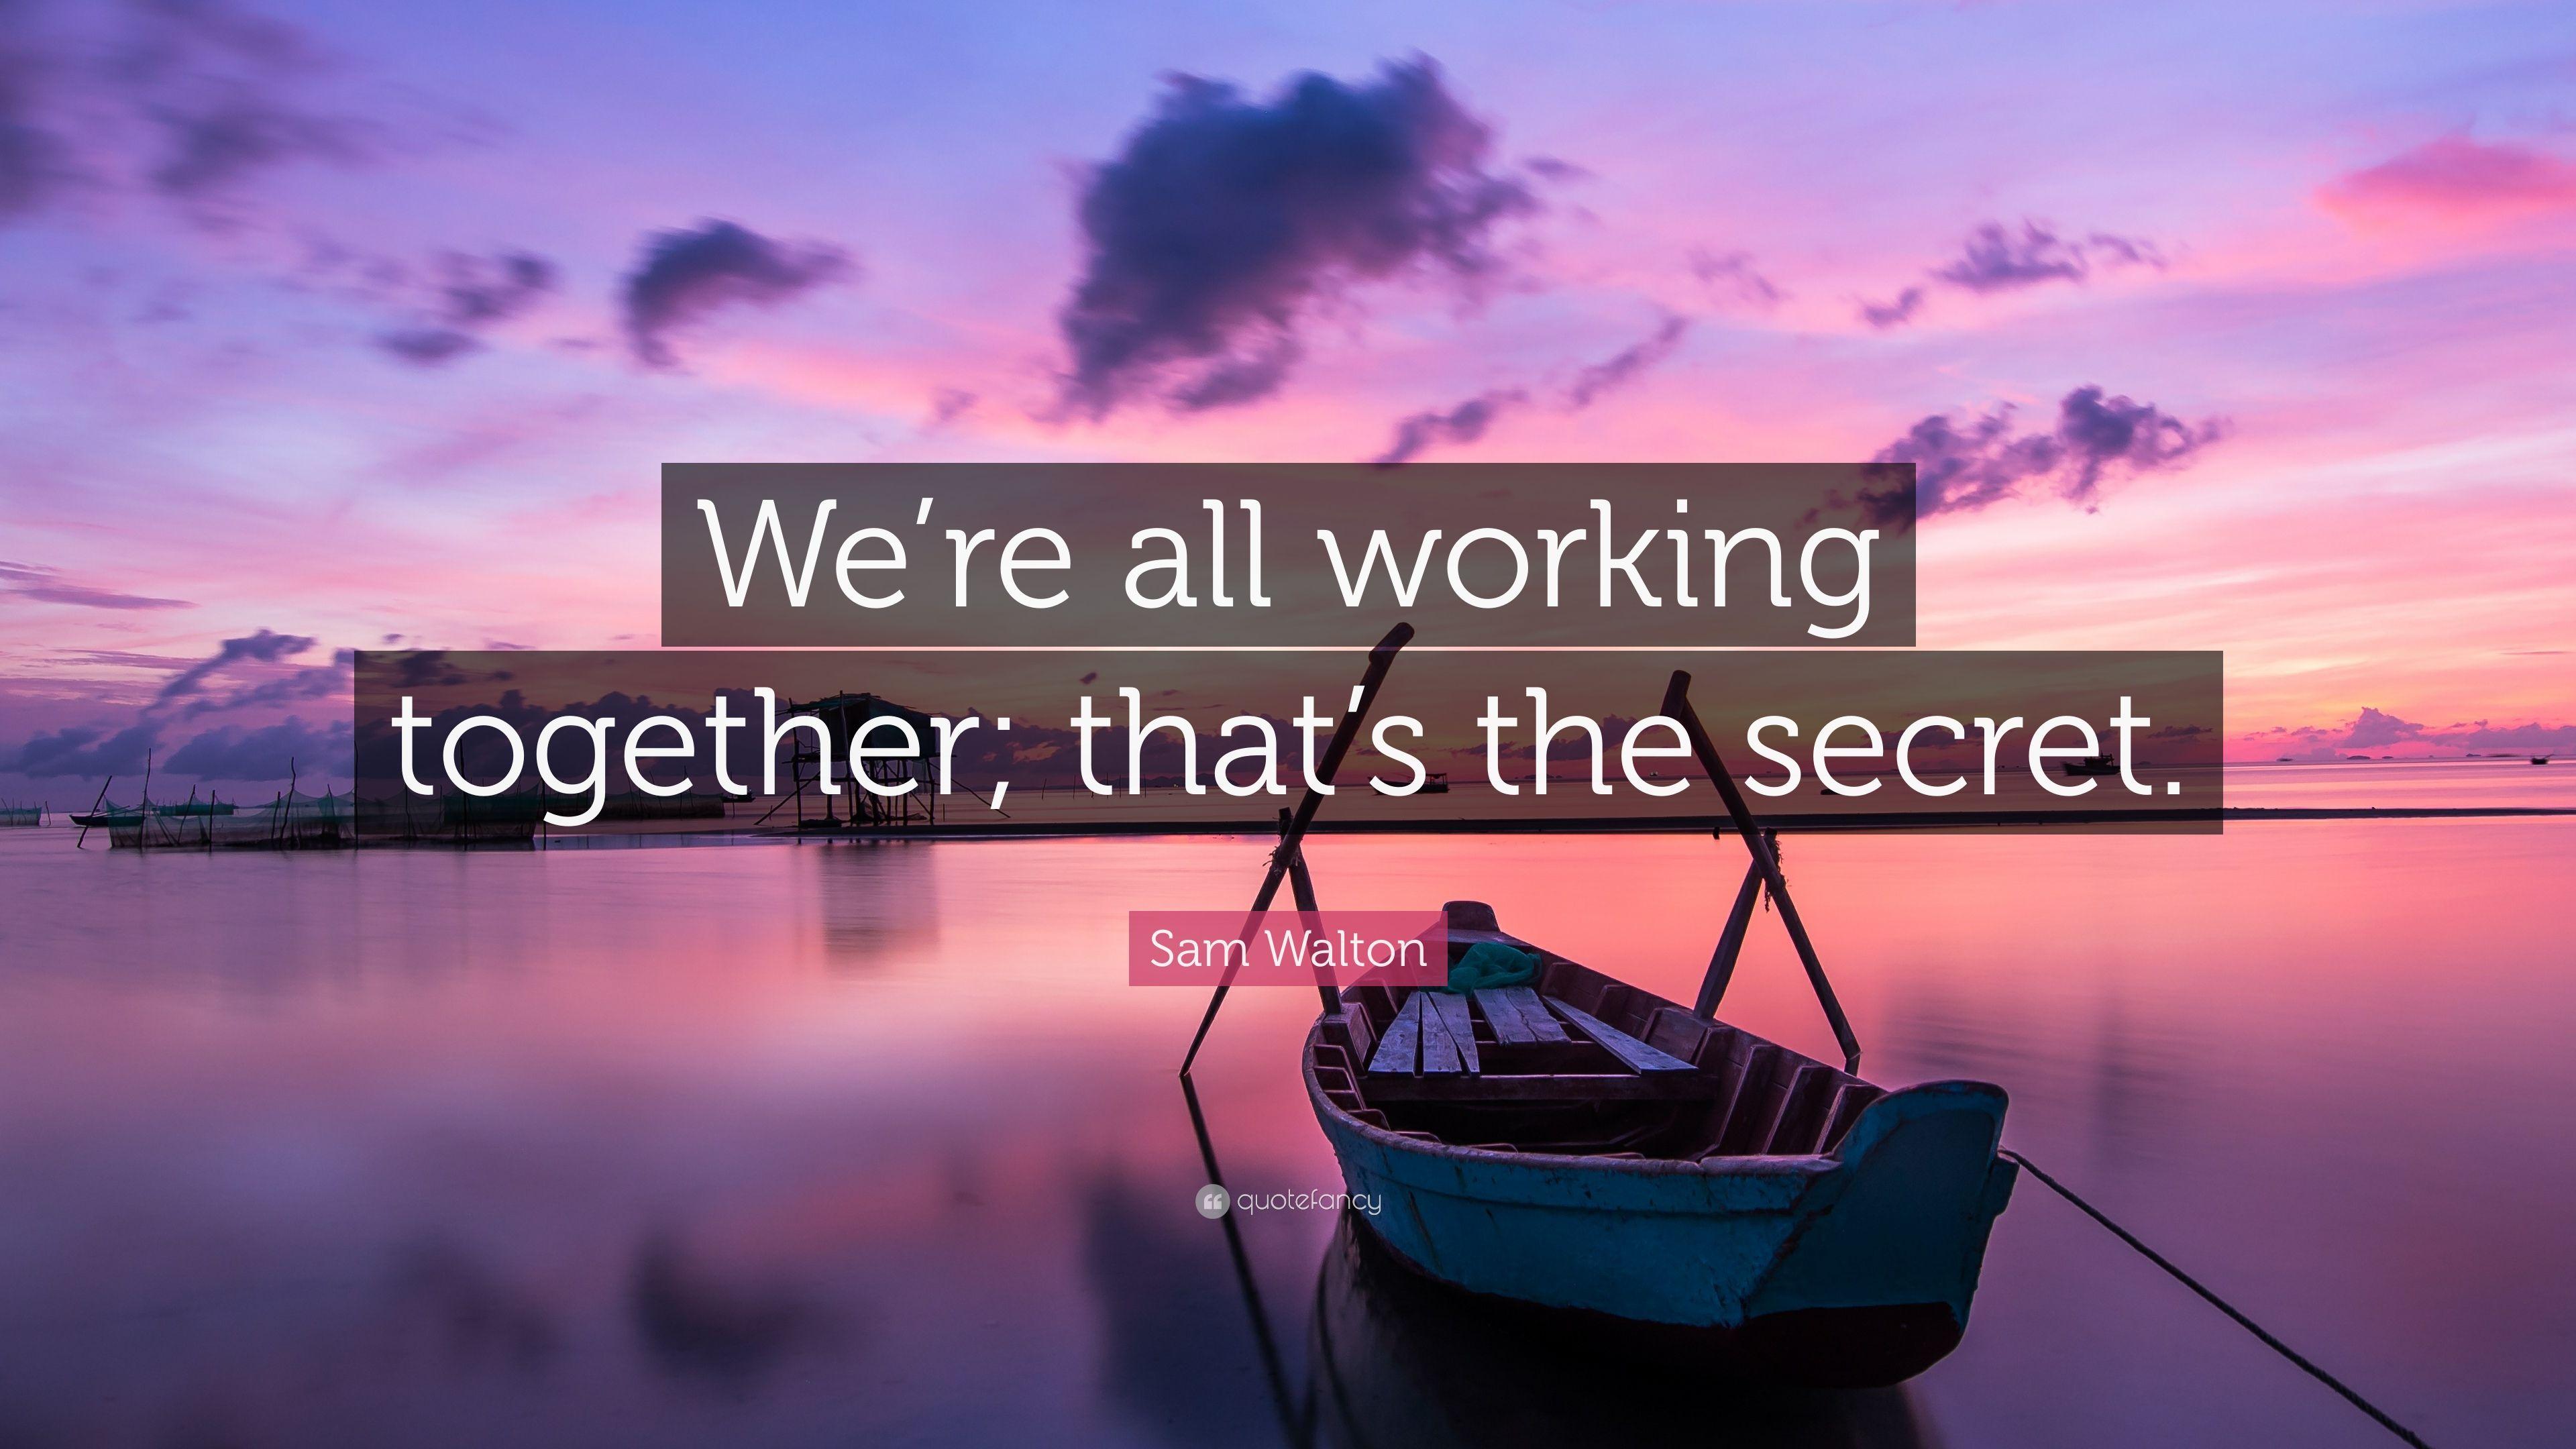 Sam Walton Quote: “We're all working together; that's the secret